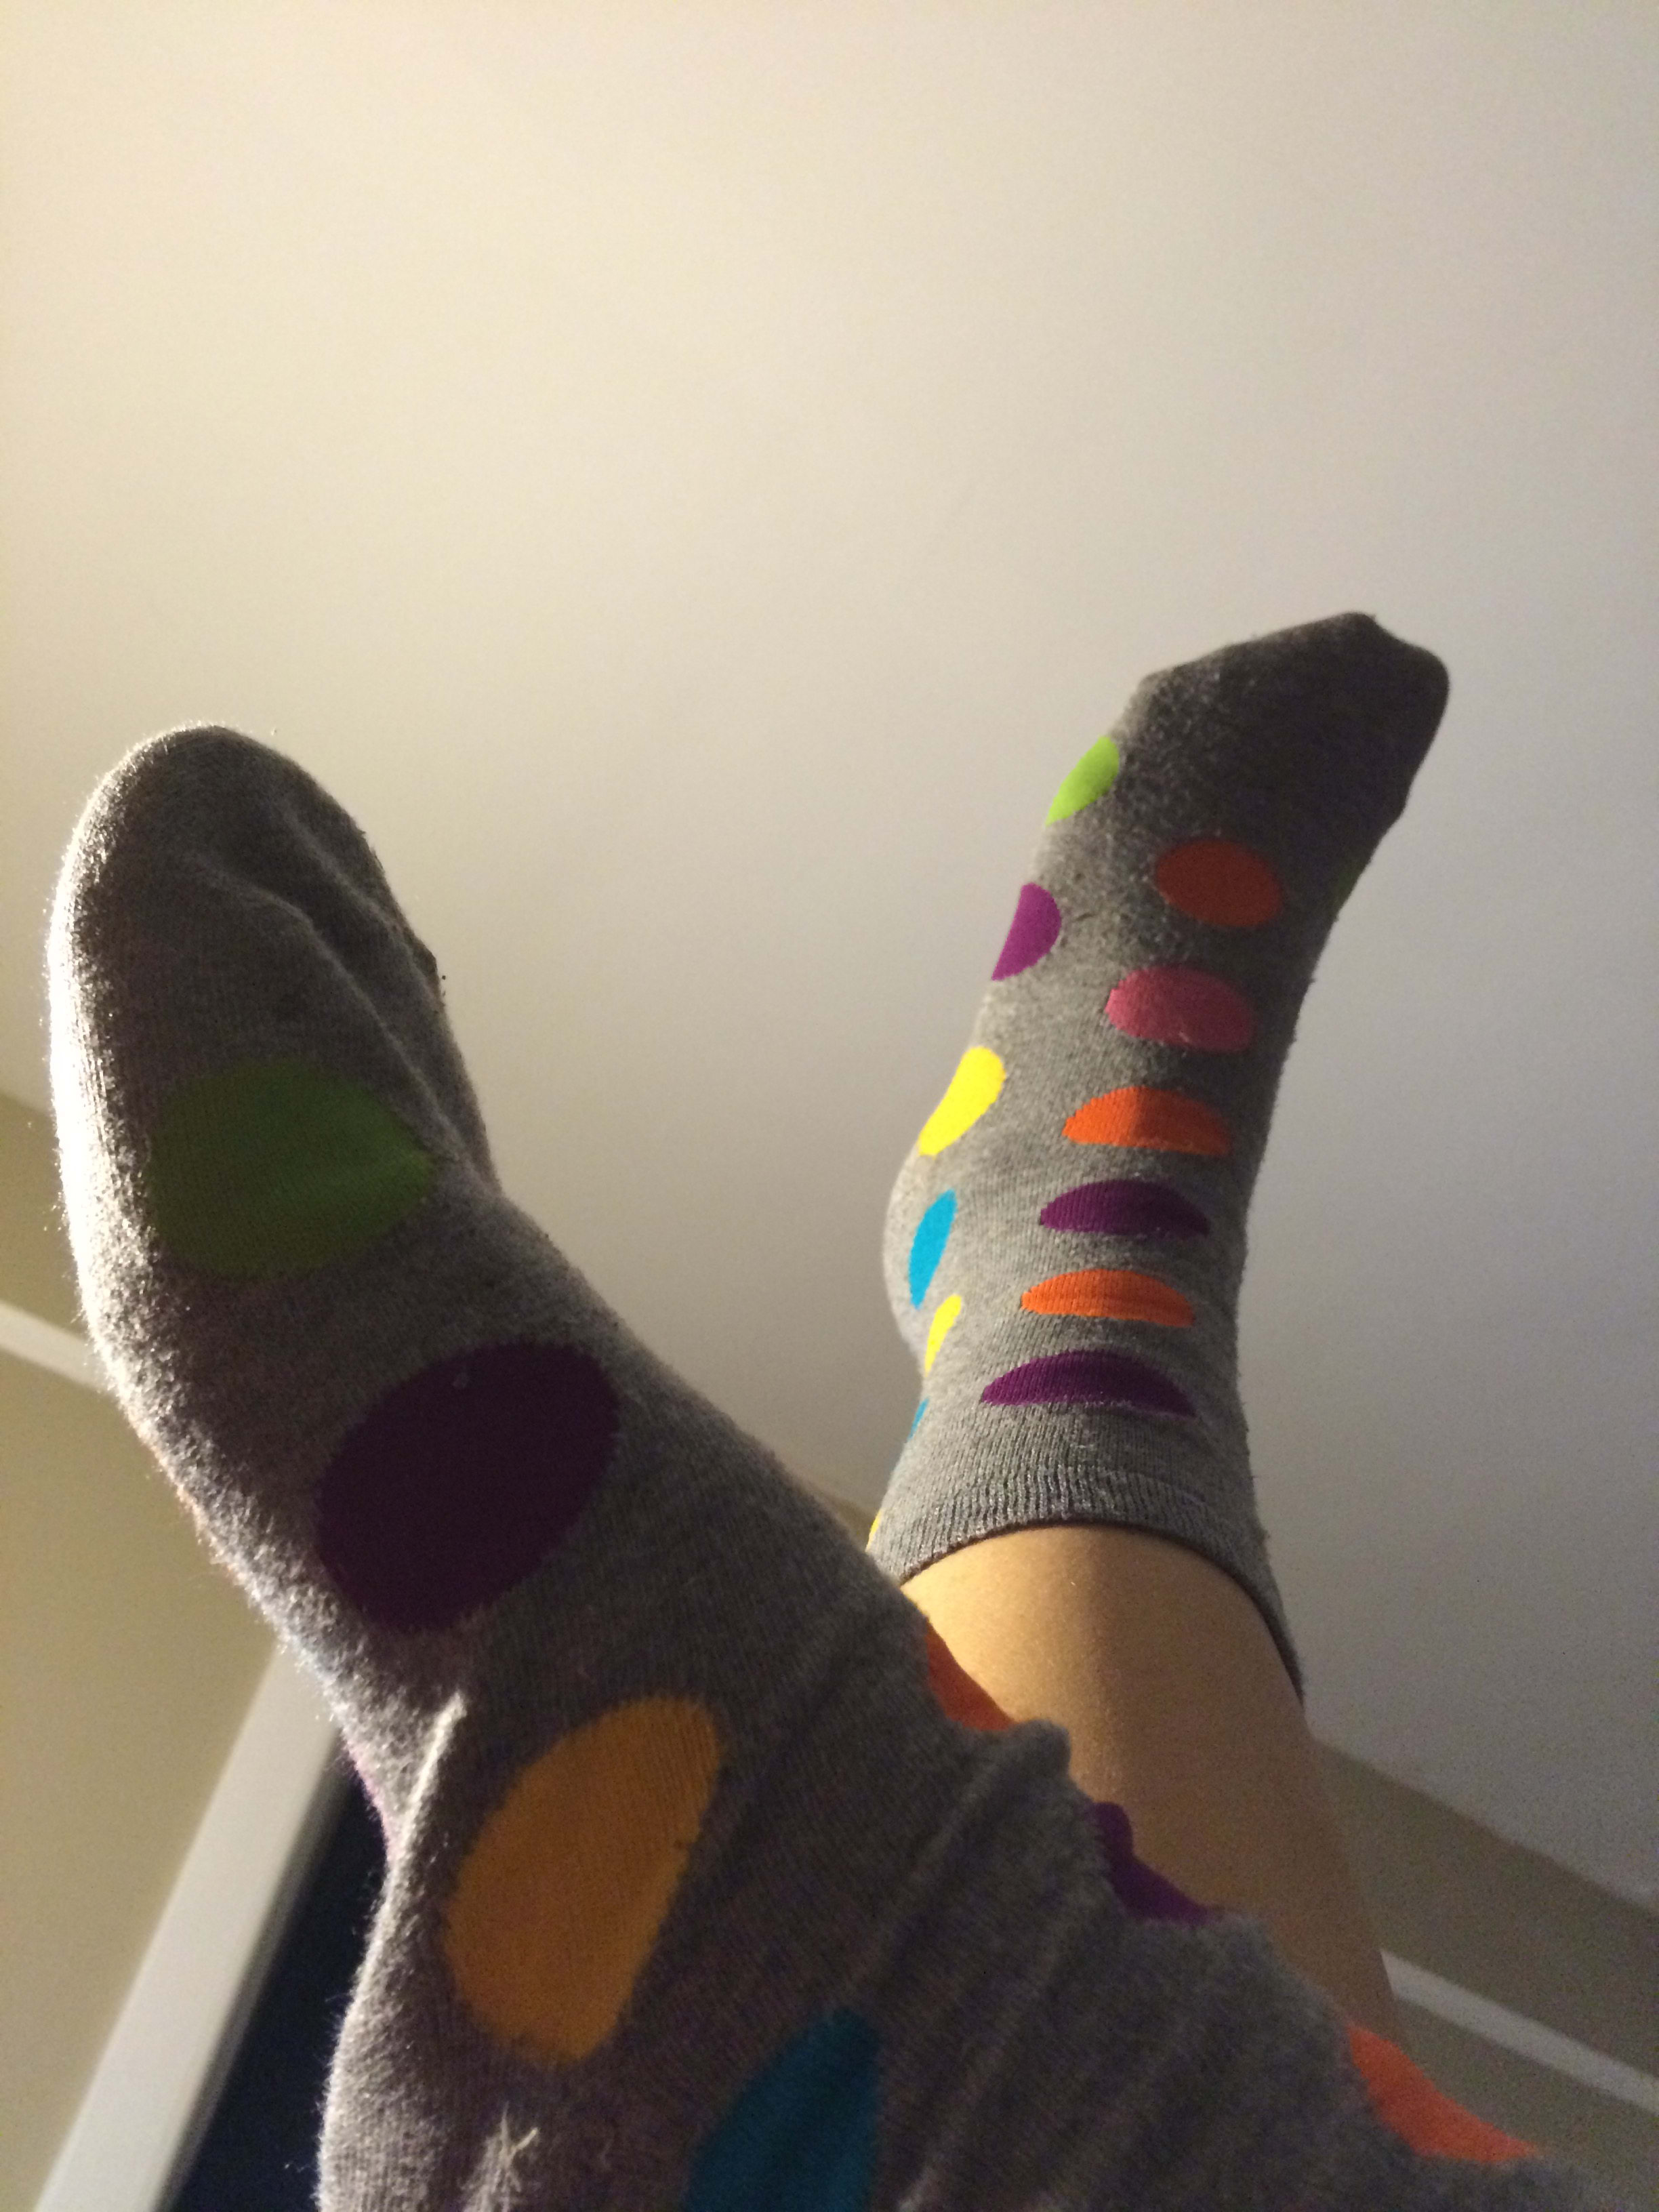 sell you pictures of my feet in cute socks